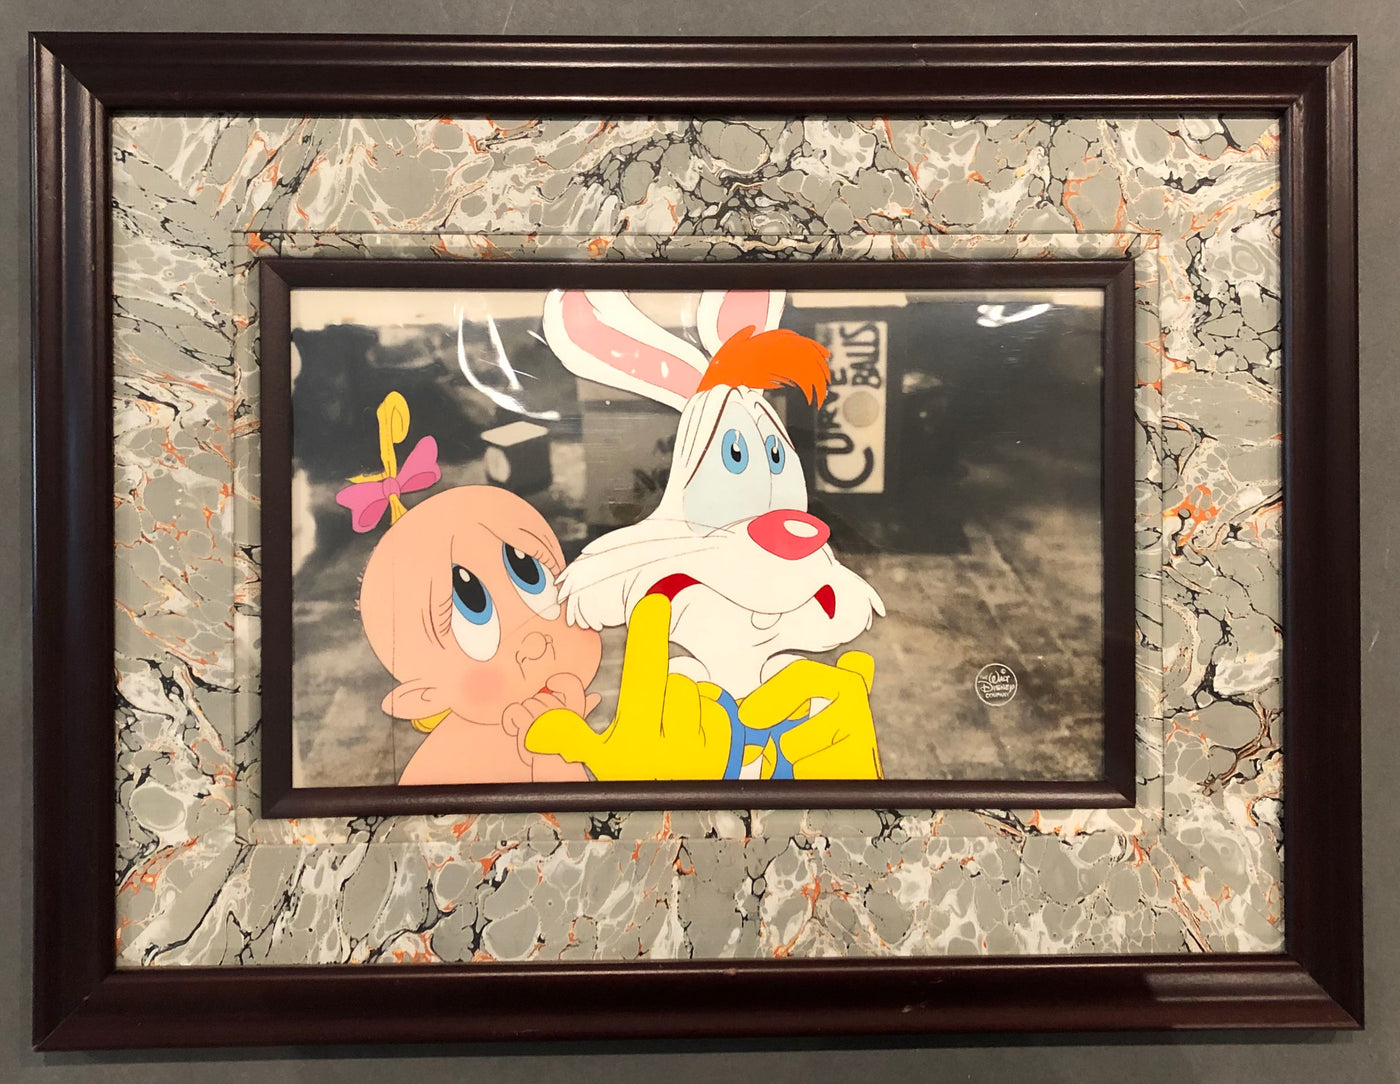 Original Walt Disney Production Cel from Who Framed Roger Rabbit featuring Roger Rabbit and Baby Herman